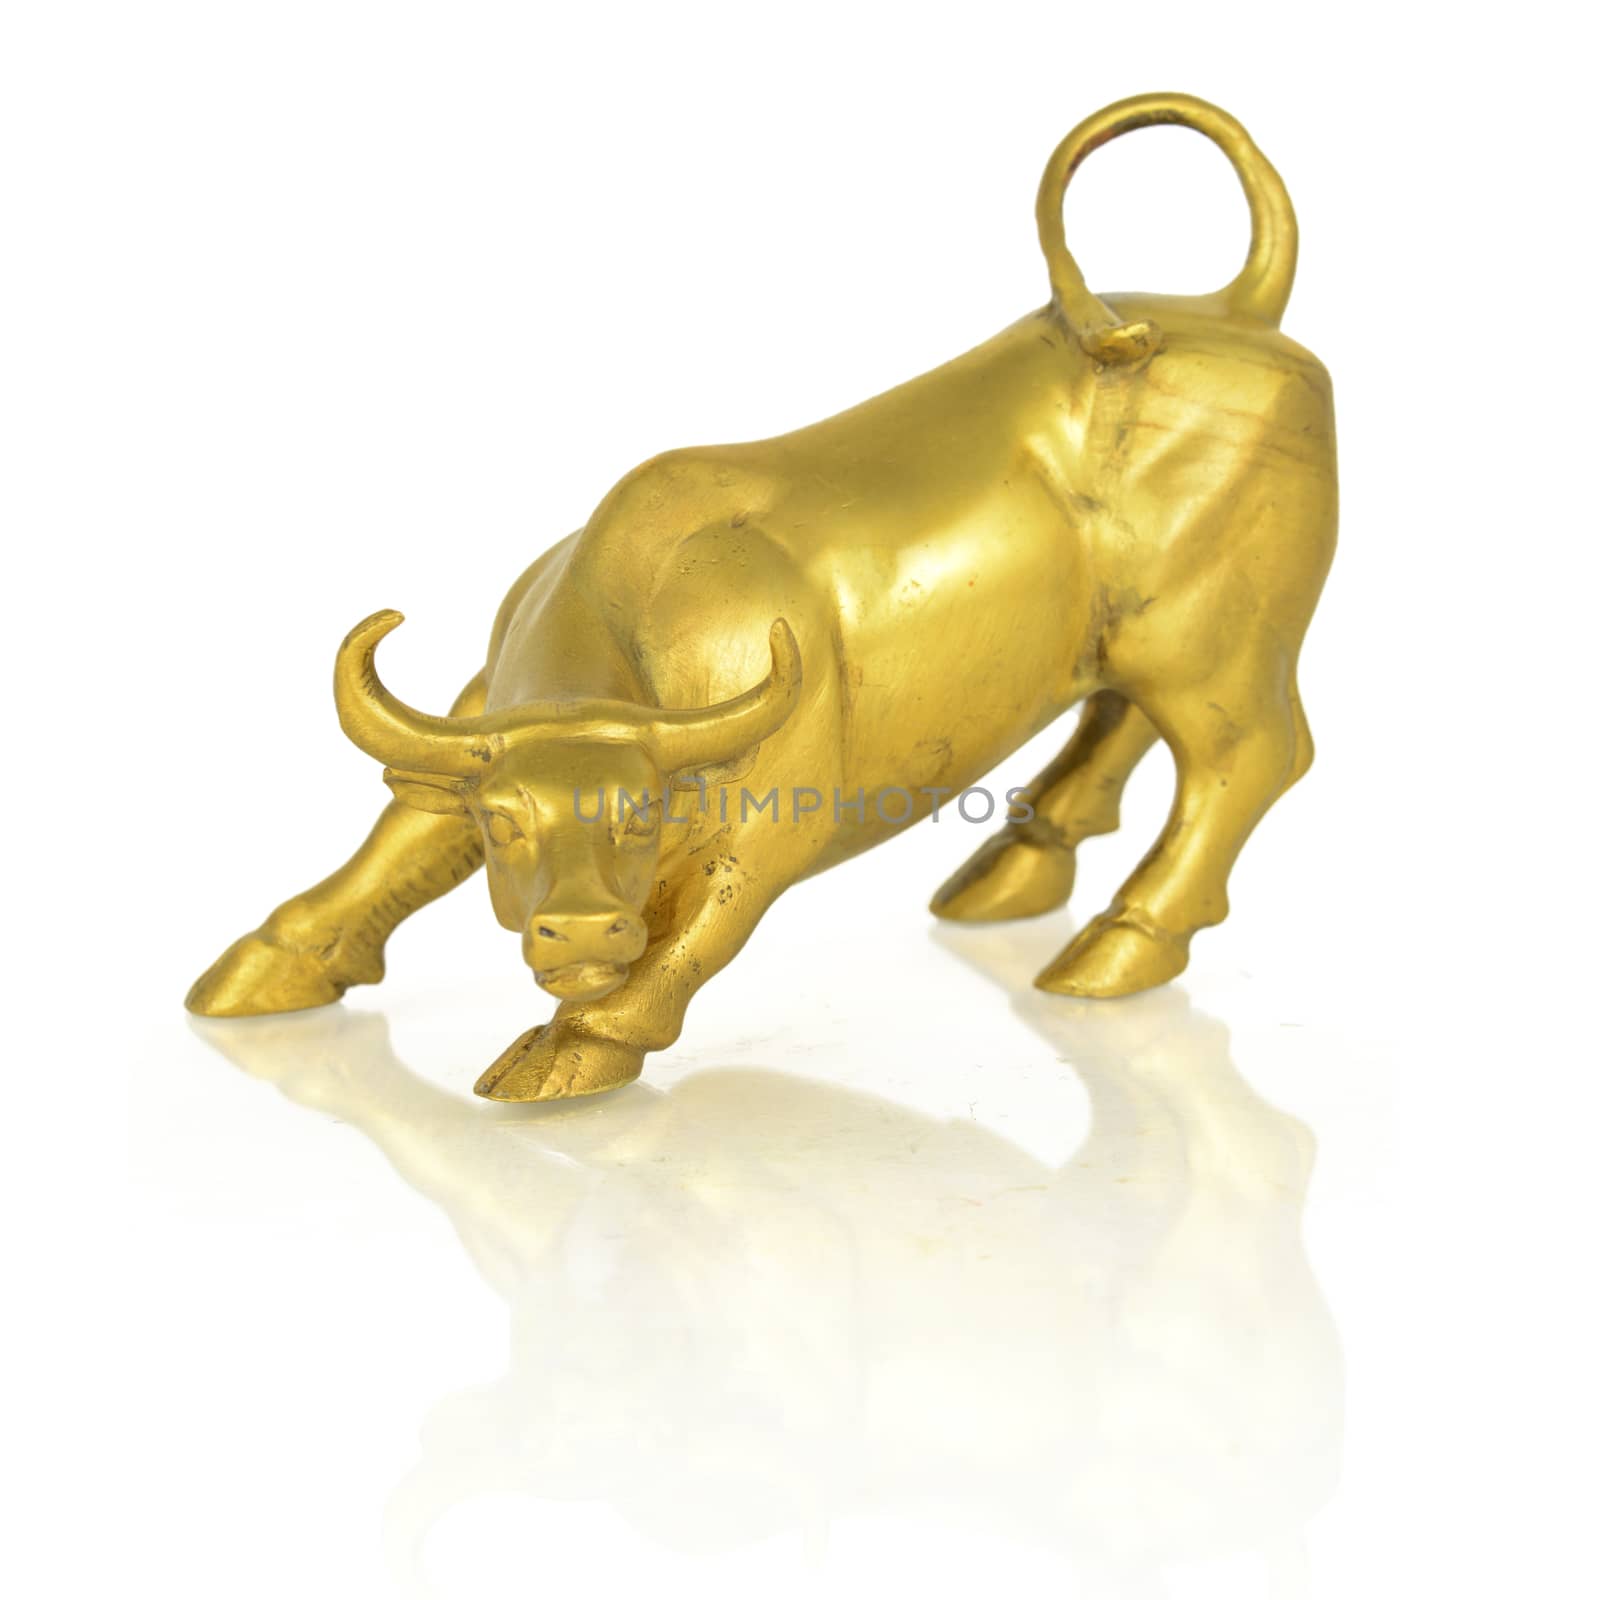 An isolated golden bull statue over a white reflective surface.